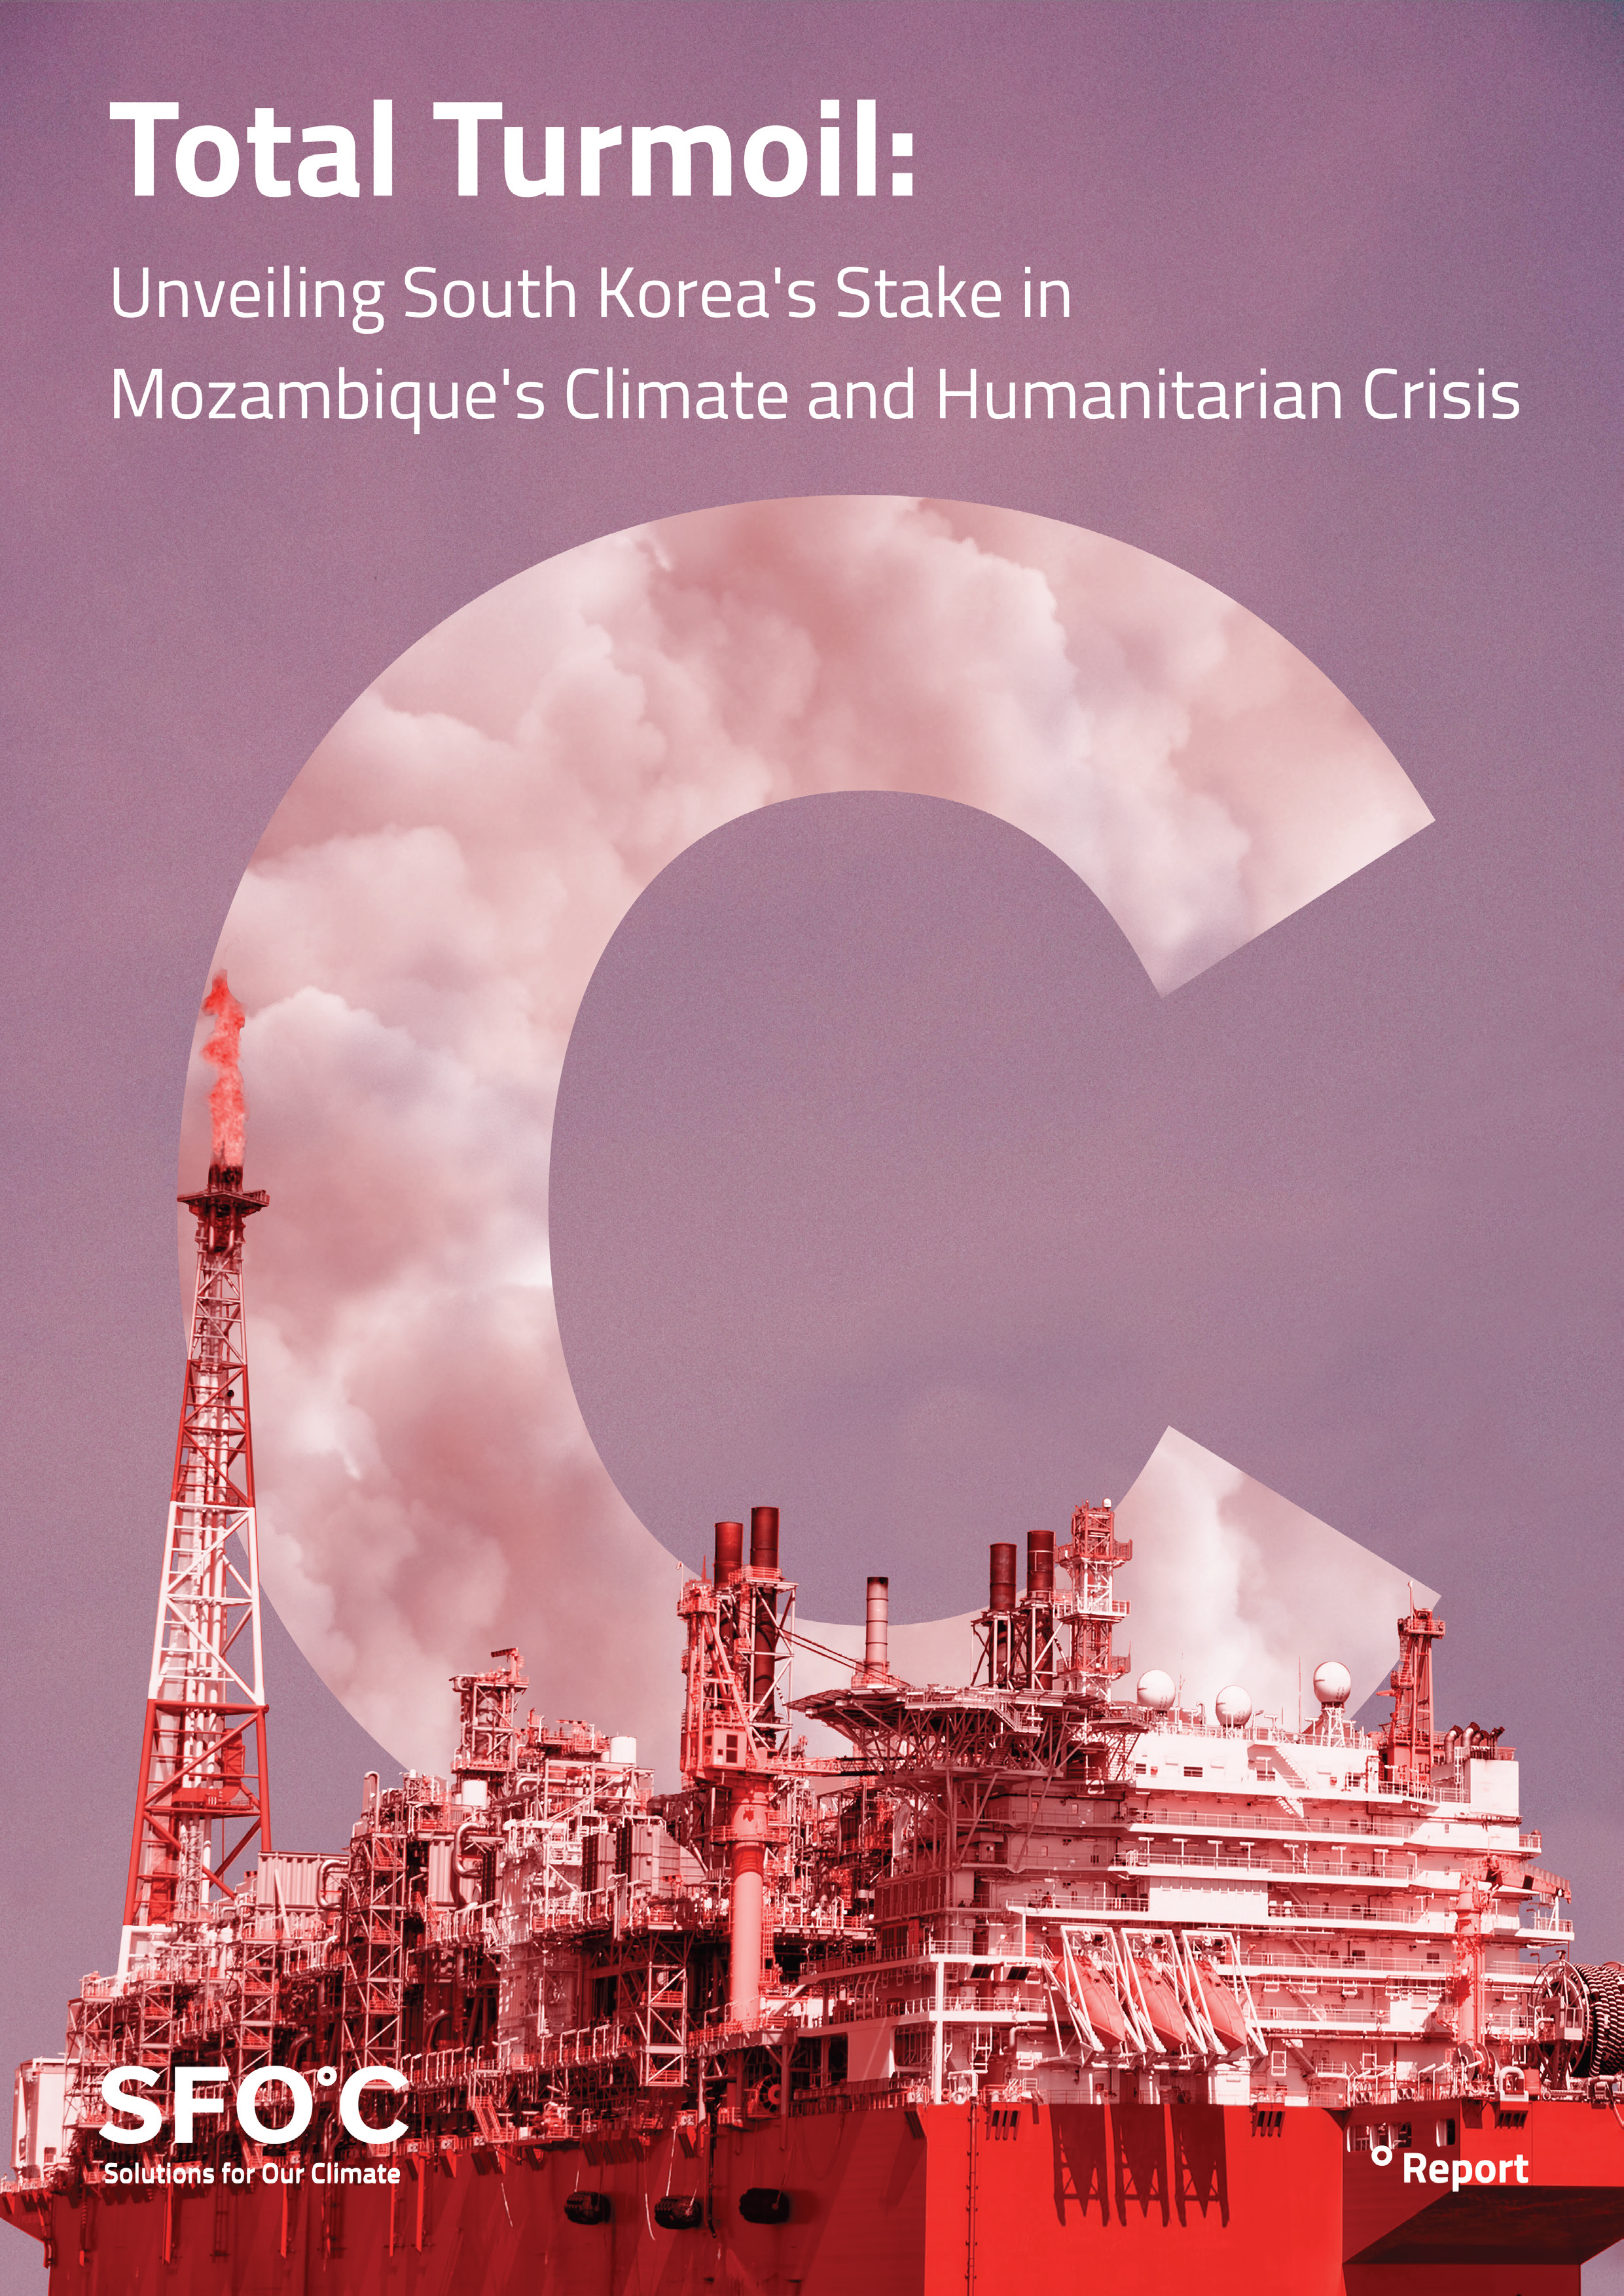 Total Turmoil: Unveiling South Korea's Stake in Mozambique's Climate and Humanitarian Crisis